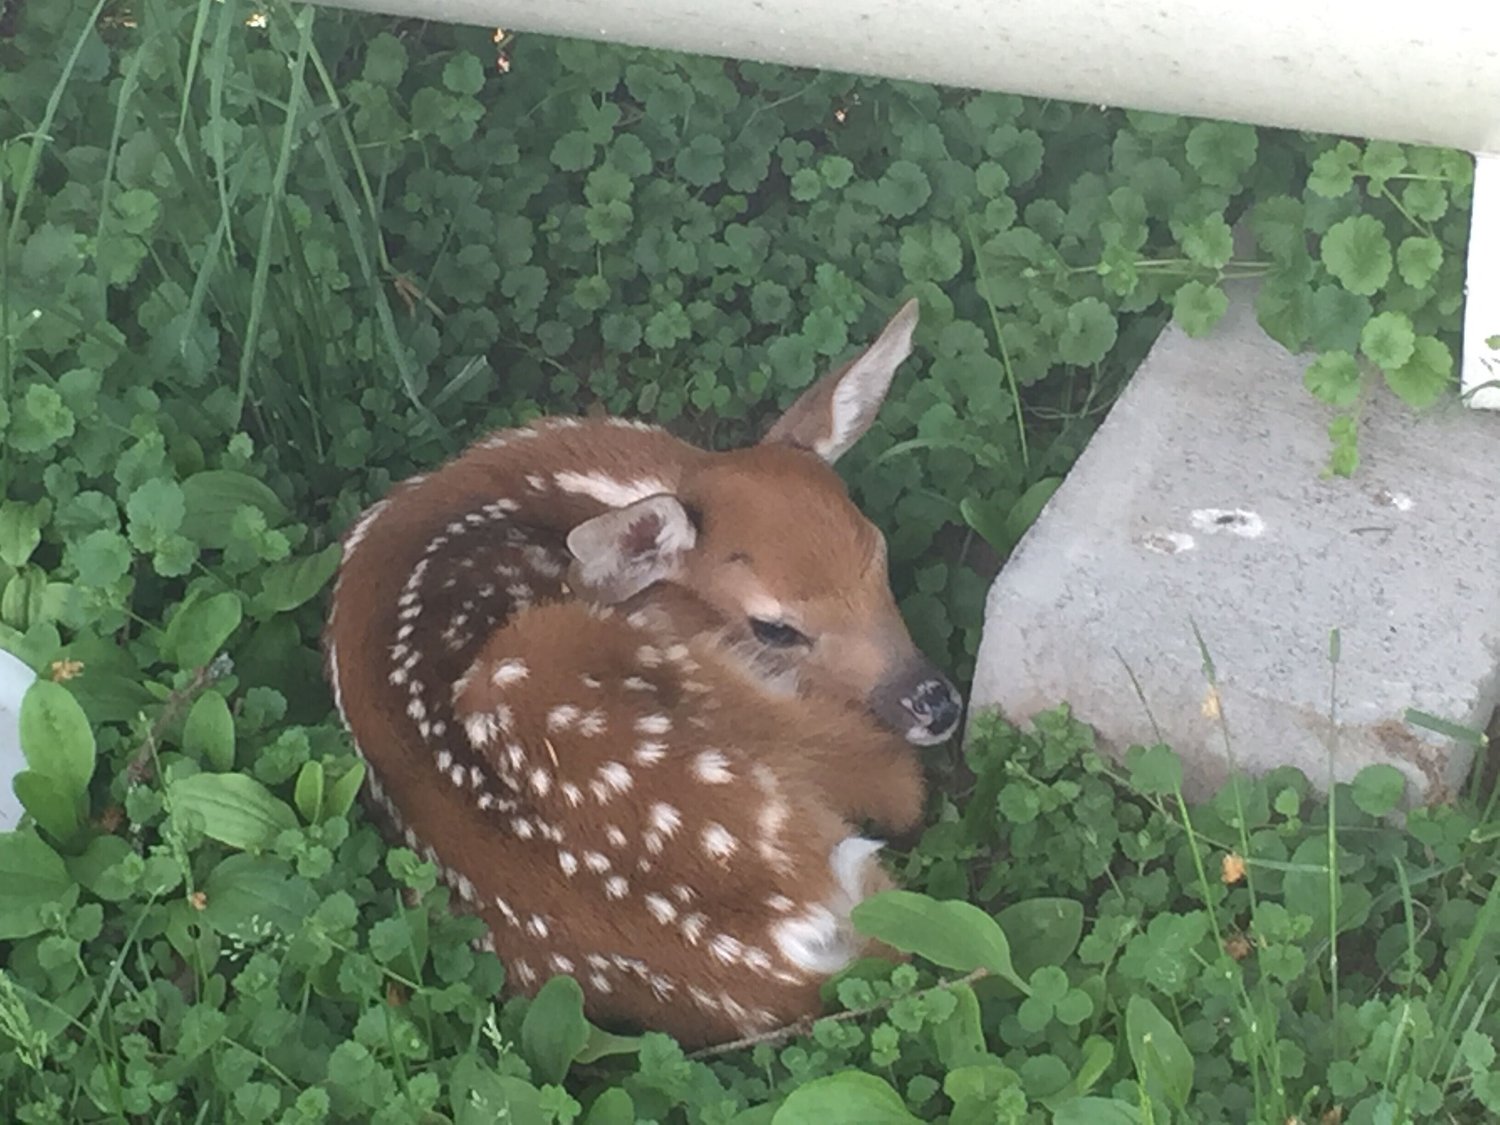 According to Dot Foster, who lives on the corner of Erie Avenue and School Street in Narrowsburg, NY, this fawn was born on Monday night, May 25 under her propane gas tank. This picture was taken on Tuesday afternoon. By Wednesday a.m., the fawn was no longer there.